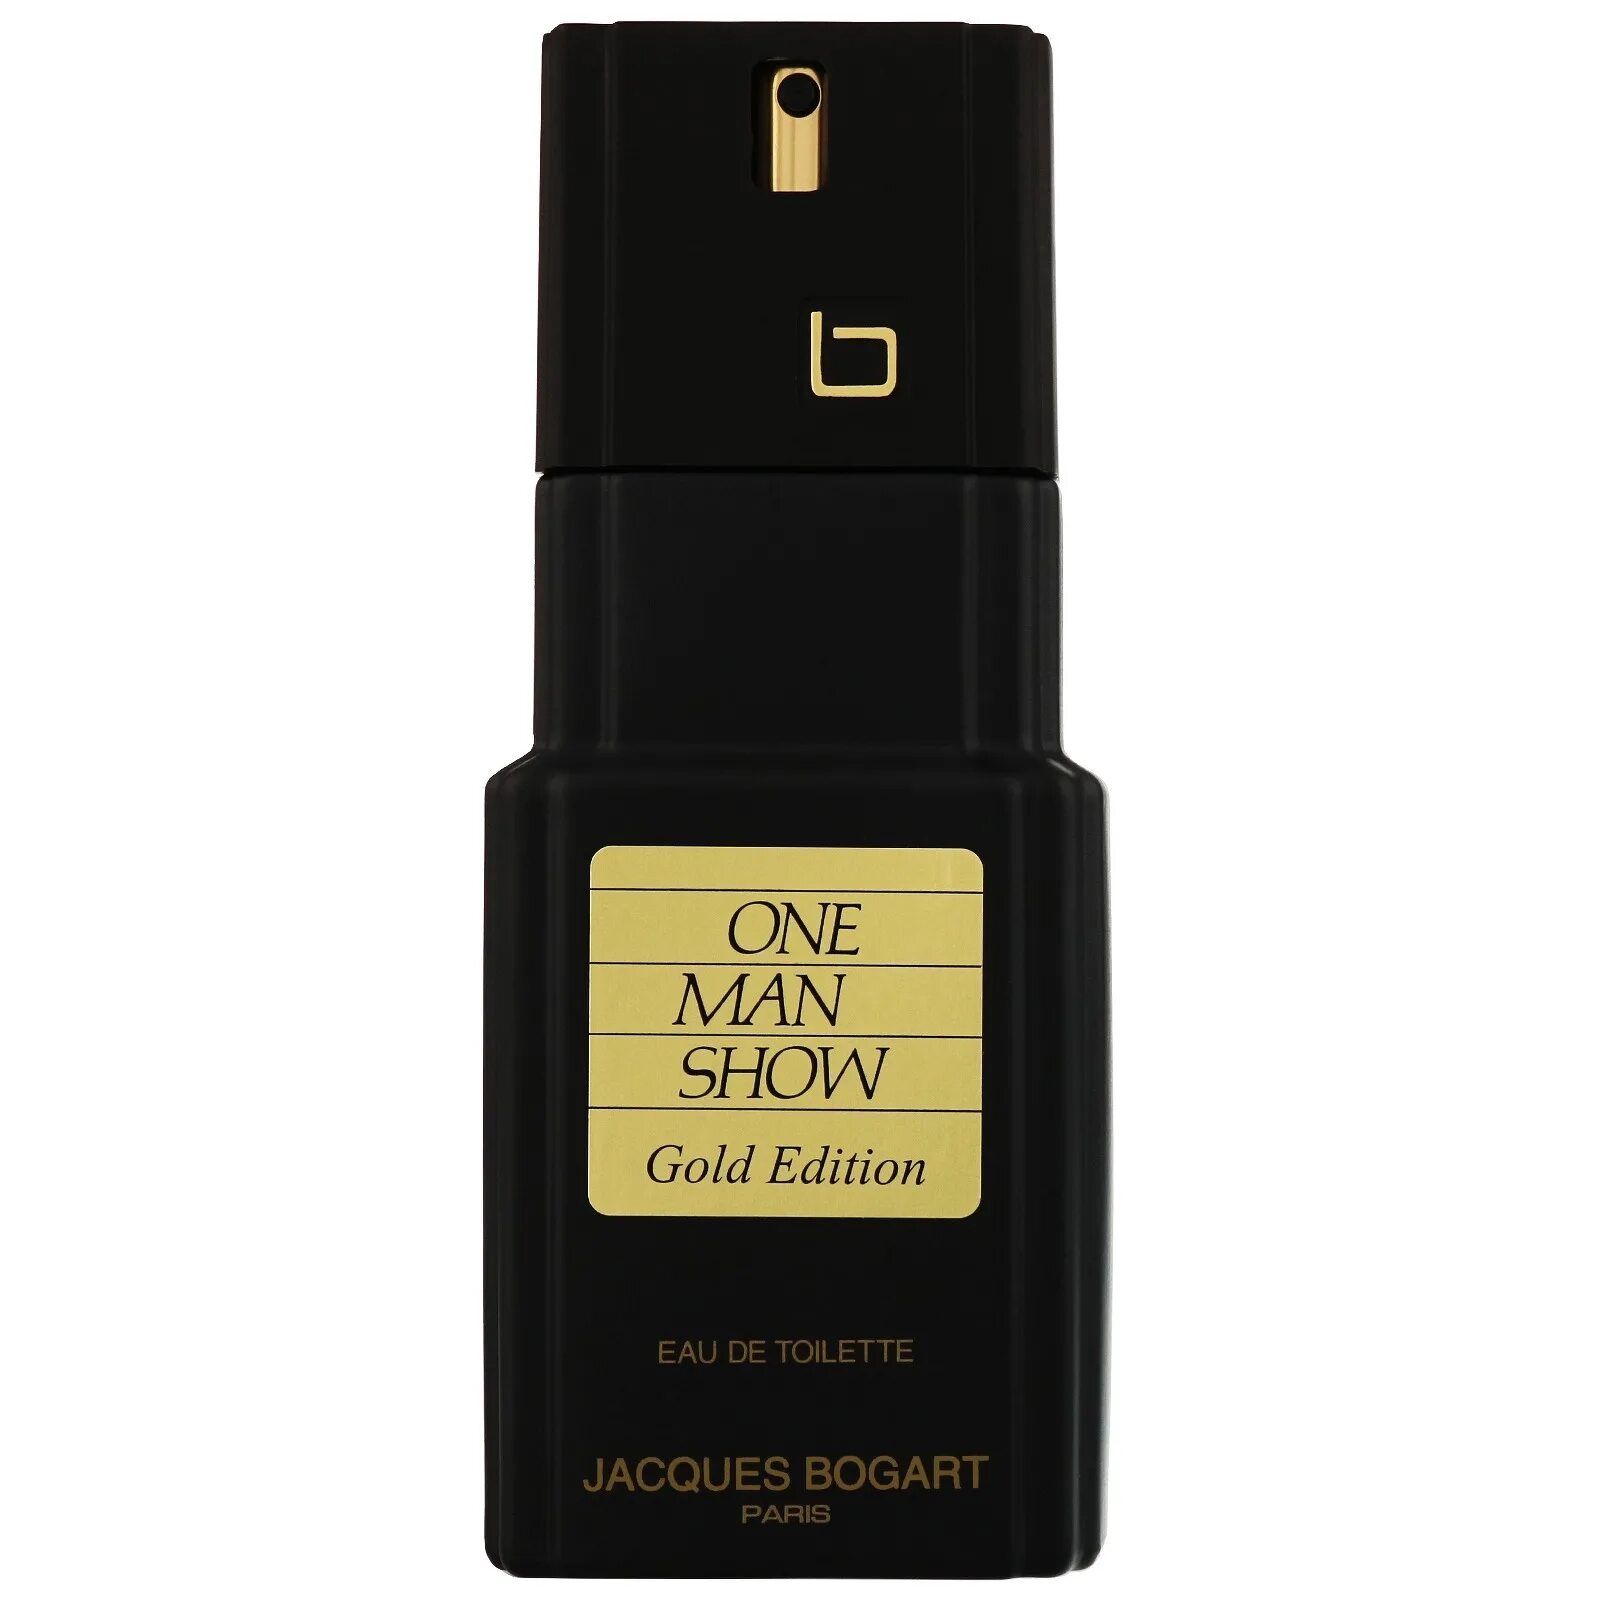 Jacques Bogart one man show, 100 ml. Туалетная вода Jacques Bogart one man show, 100 мл. Jacques Bogart one man show Gold Edition мужская. Jacques Bogart туалетная вода one man show Gold Edition, 100 мл. Мужская вода богарт